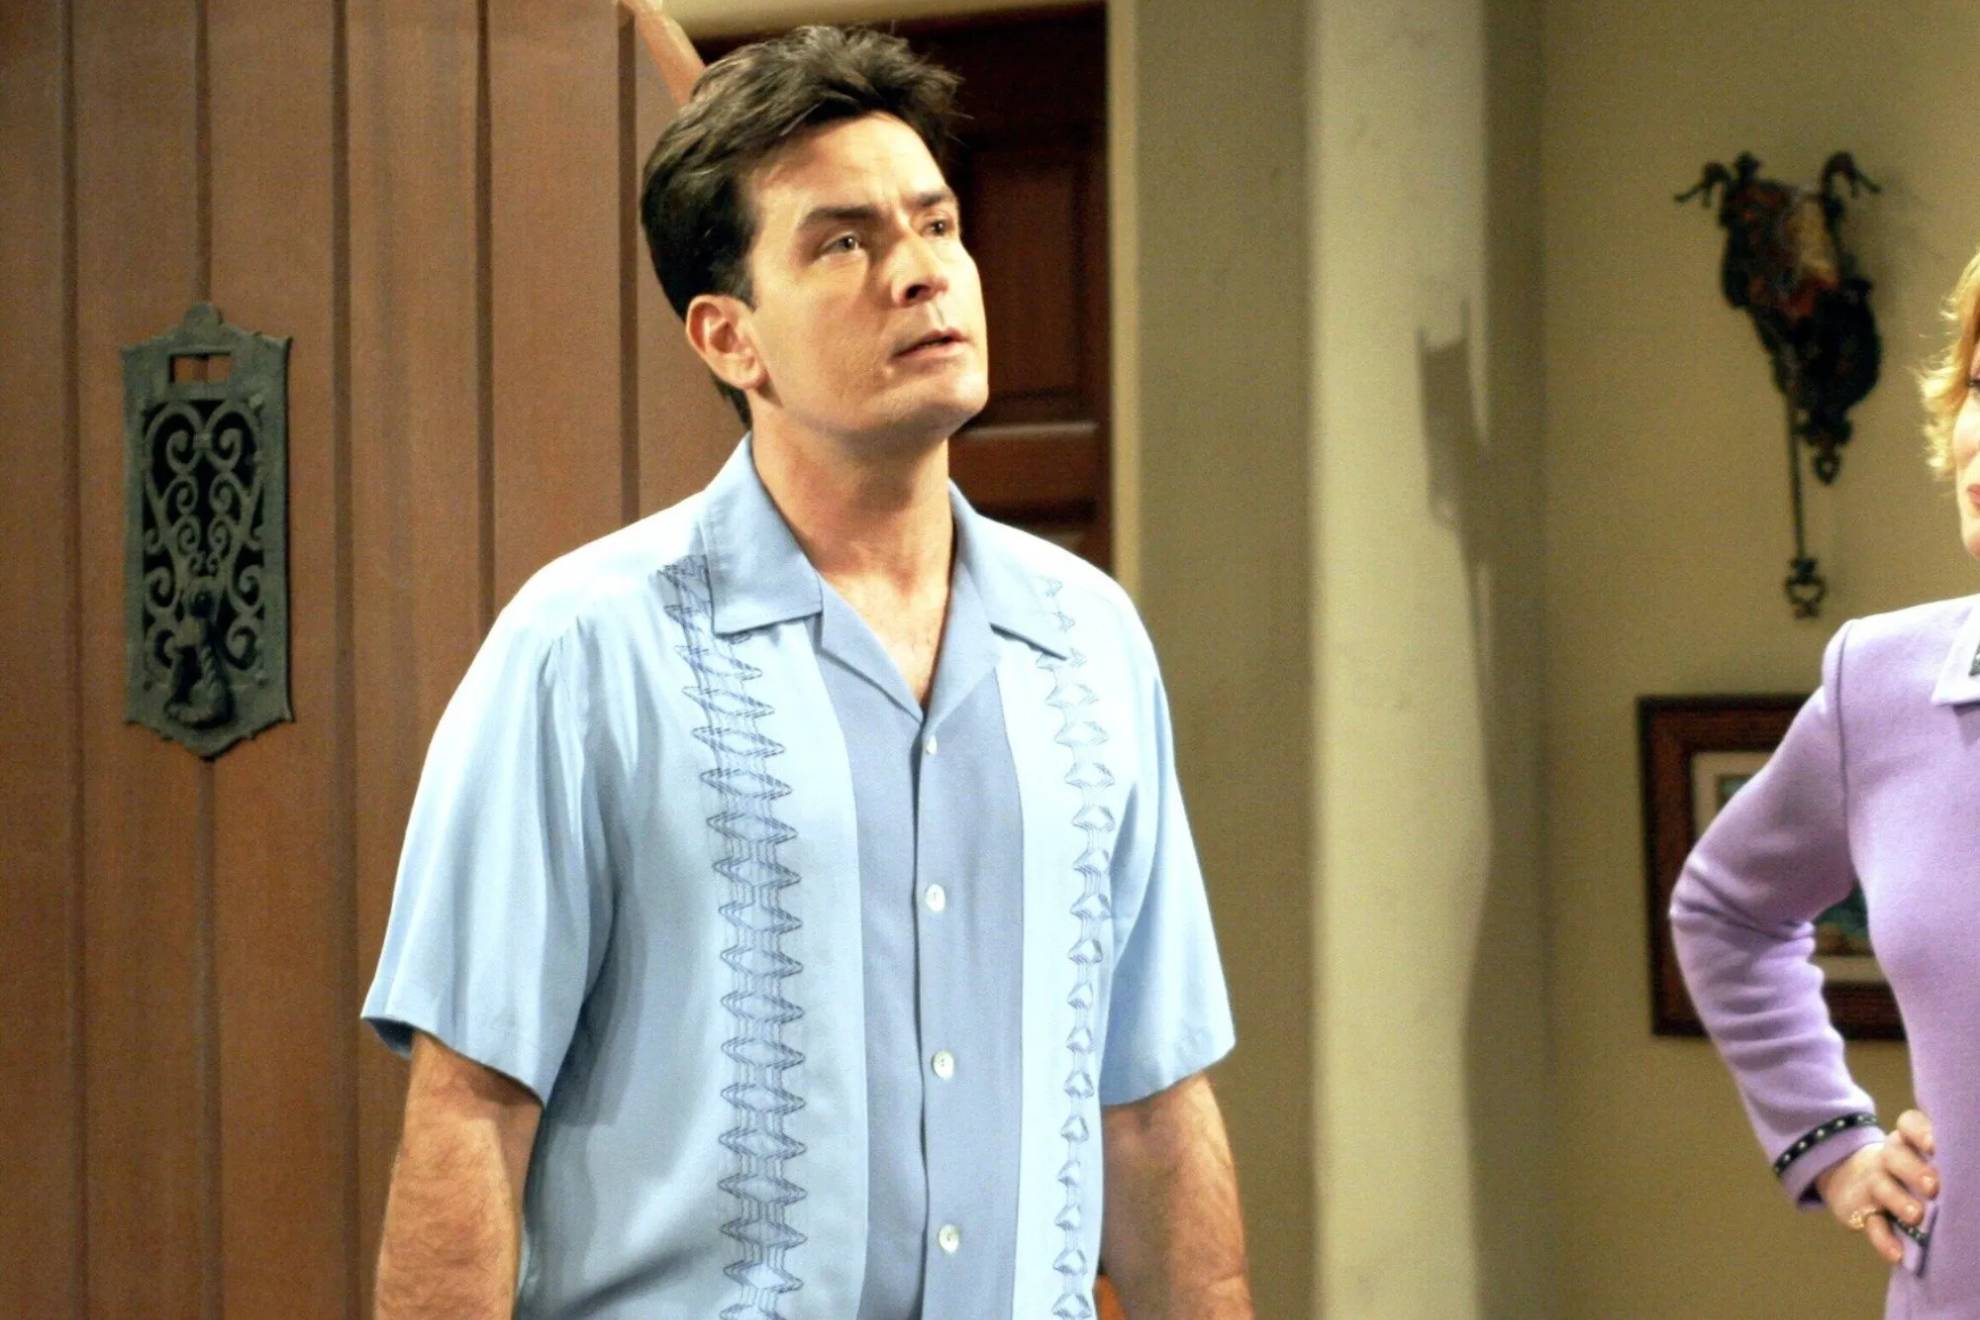 Charlie Sheen in 'Two and a Half Men'